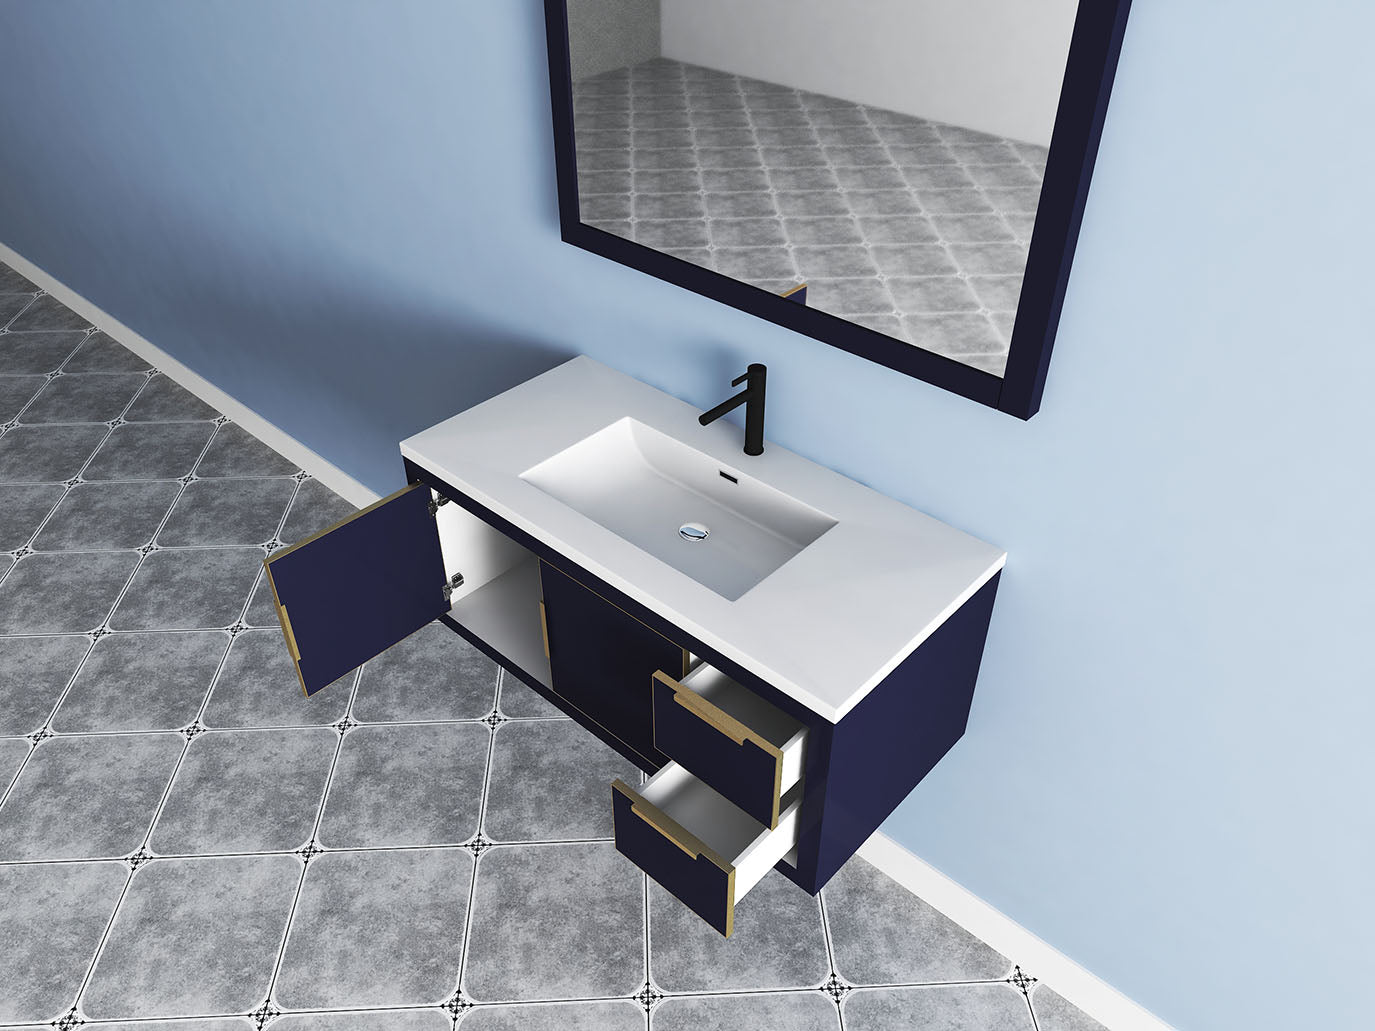 ELSA 42 WALL MOUNTED VANITY WITH REINFORCED ACRYLIC SINK (LEFT SIDE DRAWERS)  (ELSA42LWH)